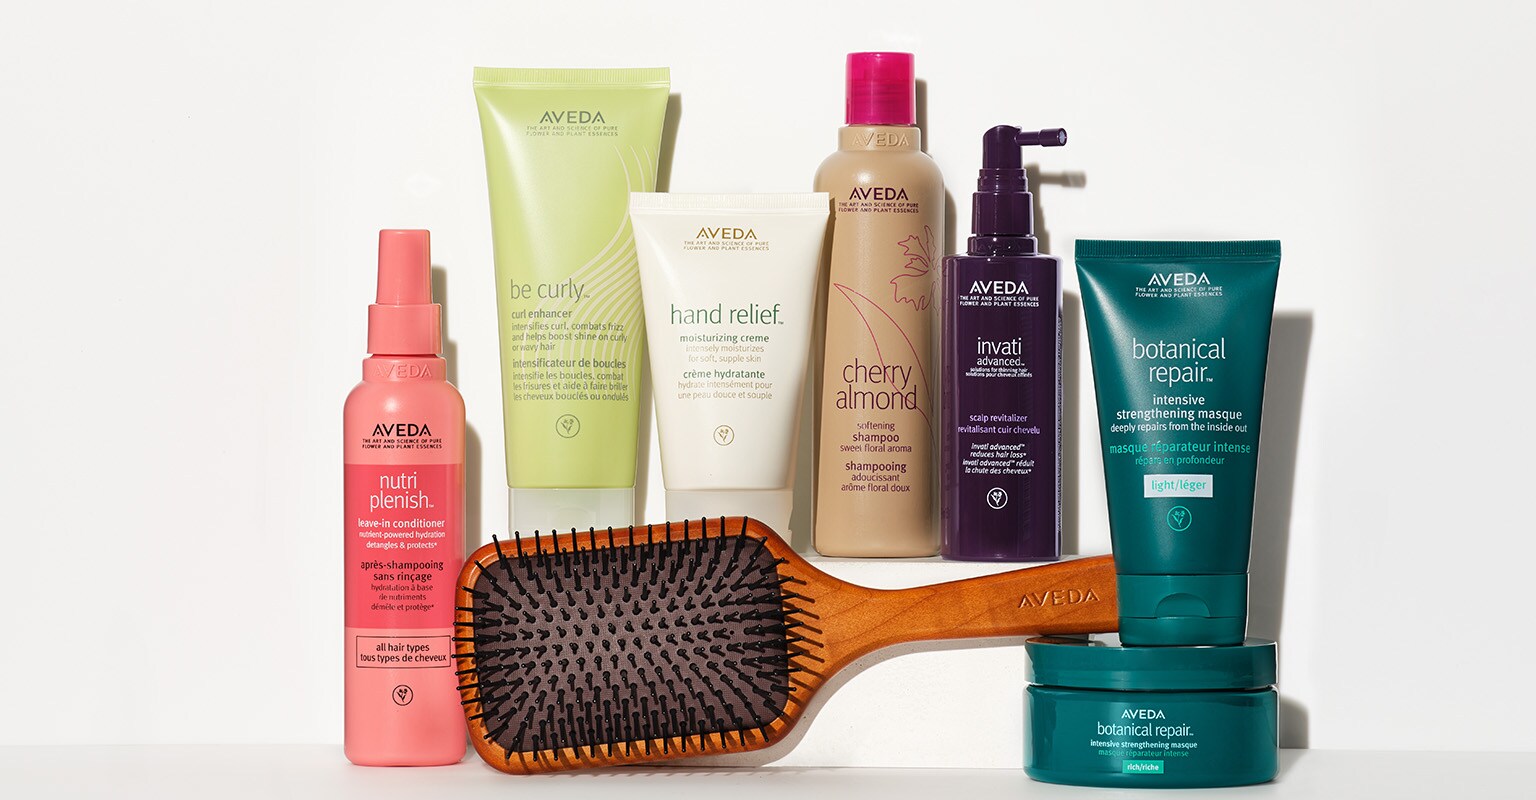 Shop Aveda Essentials with 15% off + free travel-size duo with $120+ orders*